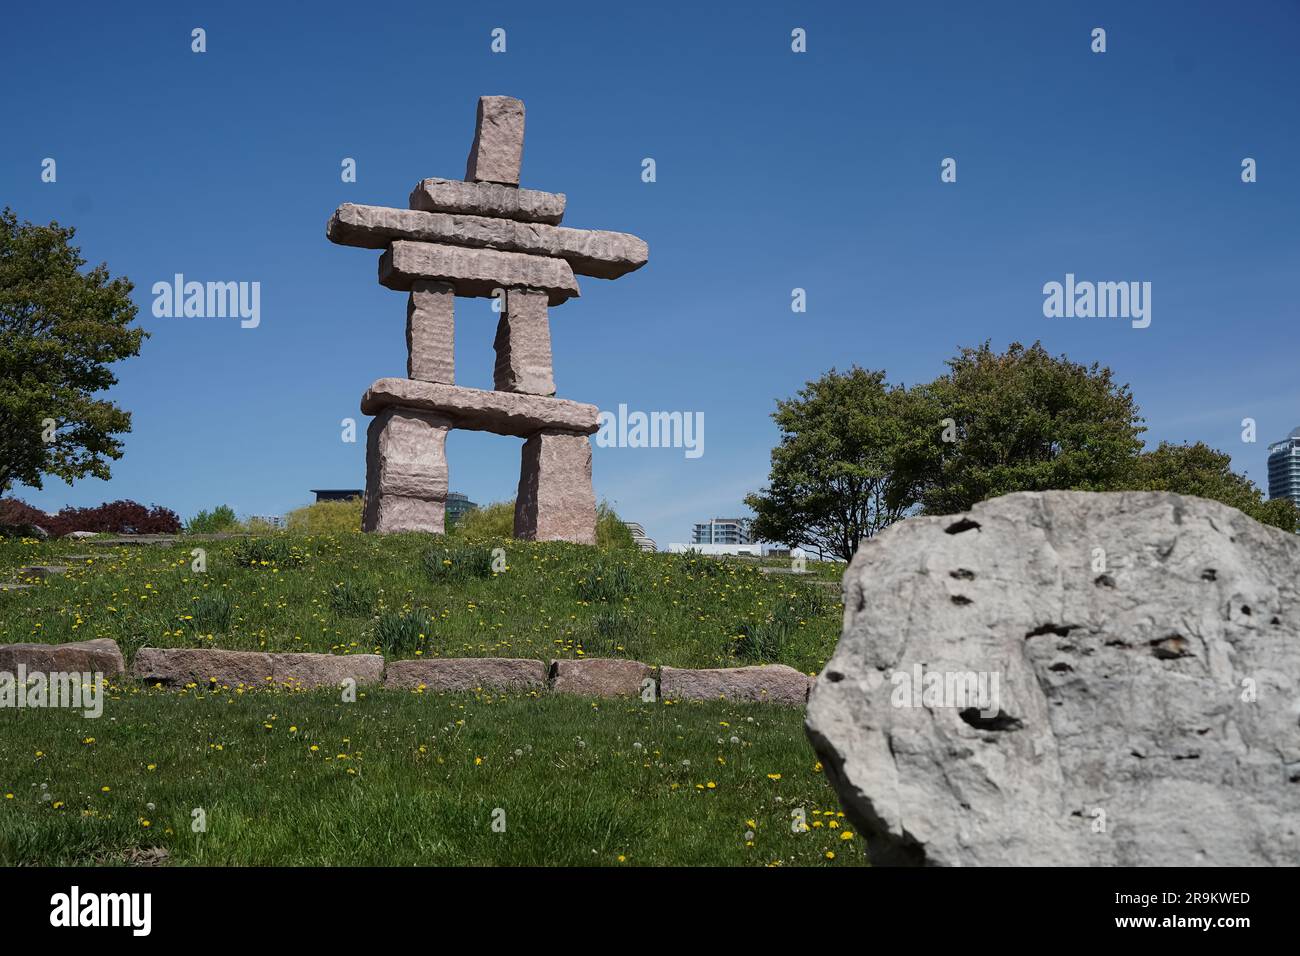 The Toronto Inukshuk Park, formerly Battery Park, is home to the Toronto Inukshuk, a legacy project to commemorate World Youth Day in 2002 that brings Stock Photo